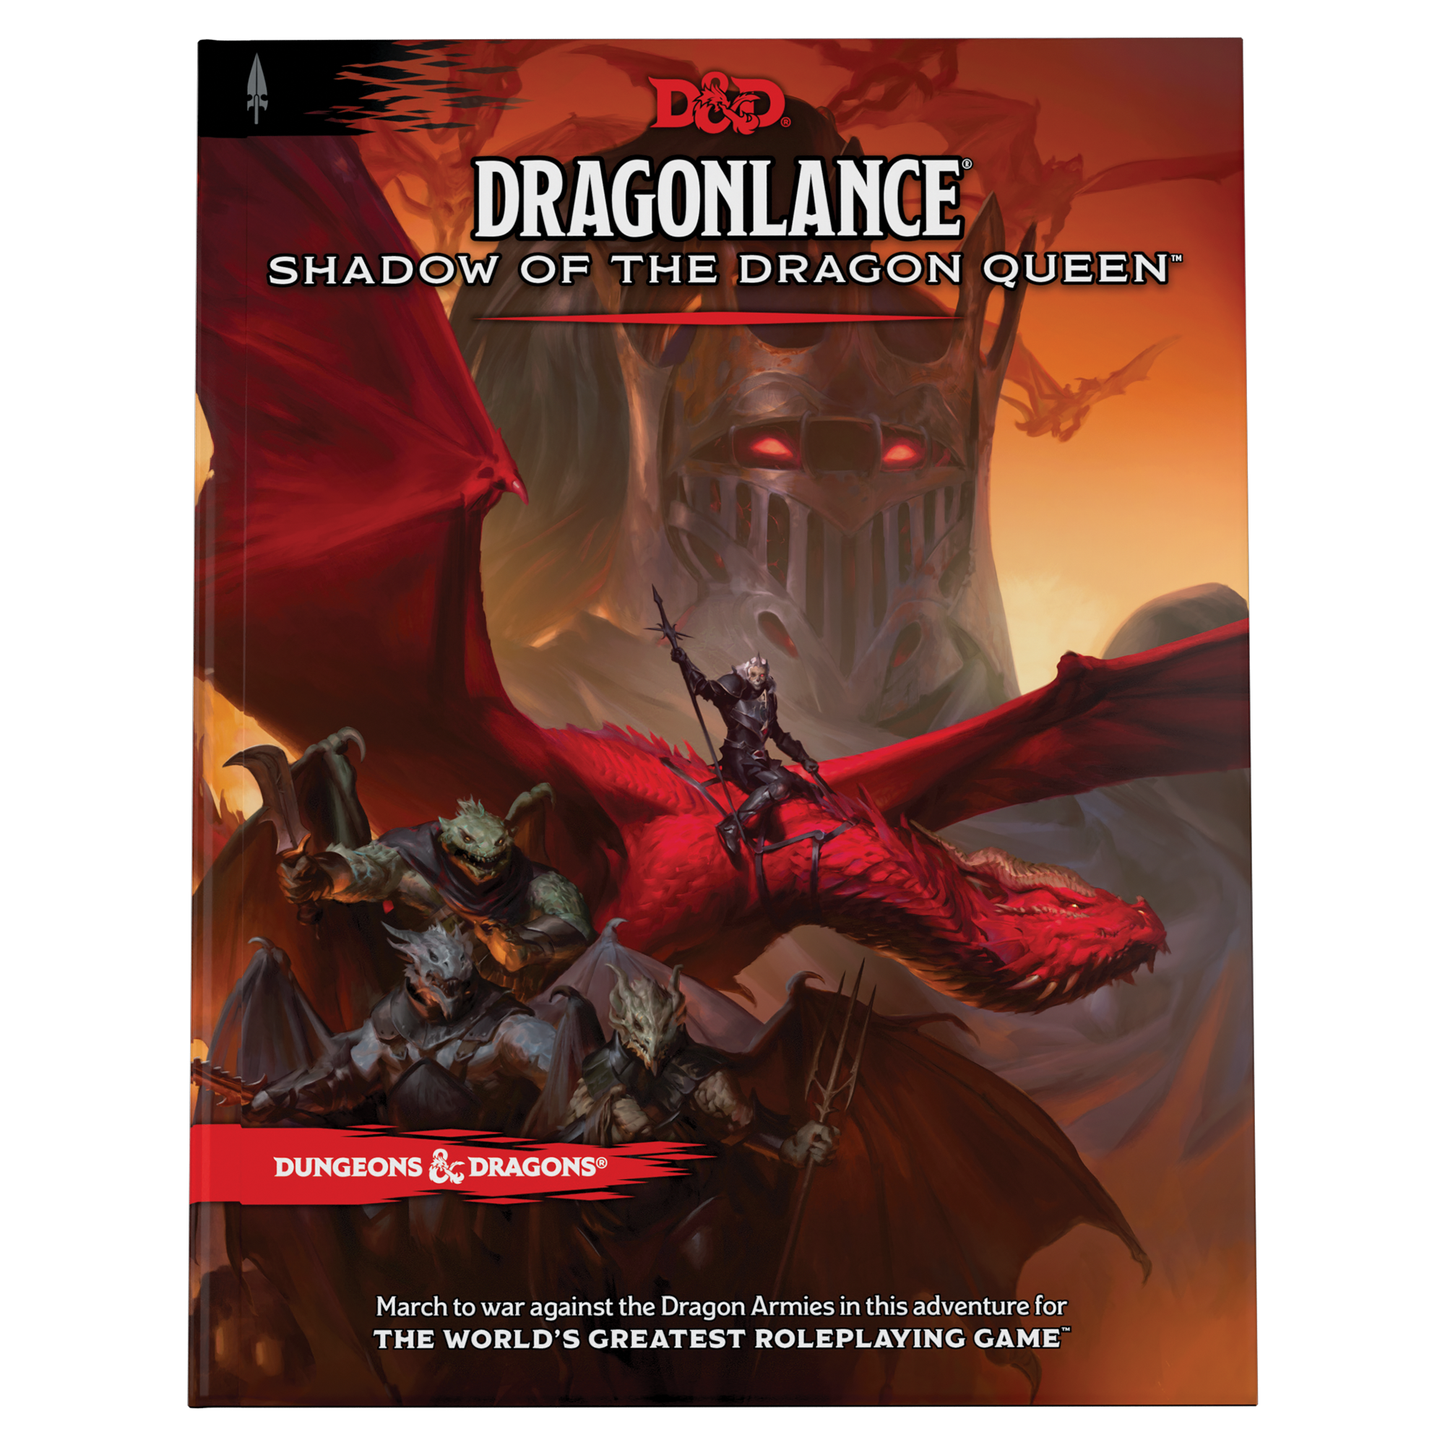 D&D - Dragonlance: Shadow of the Dragon Queen